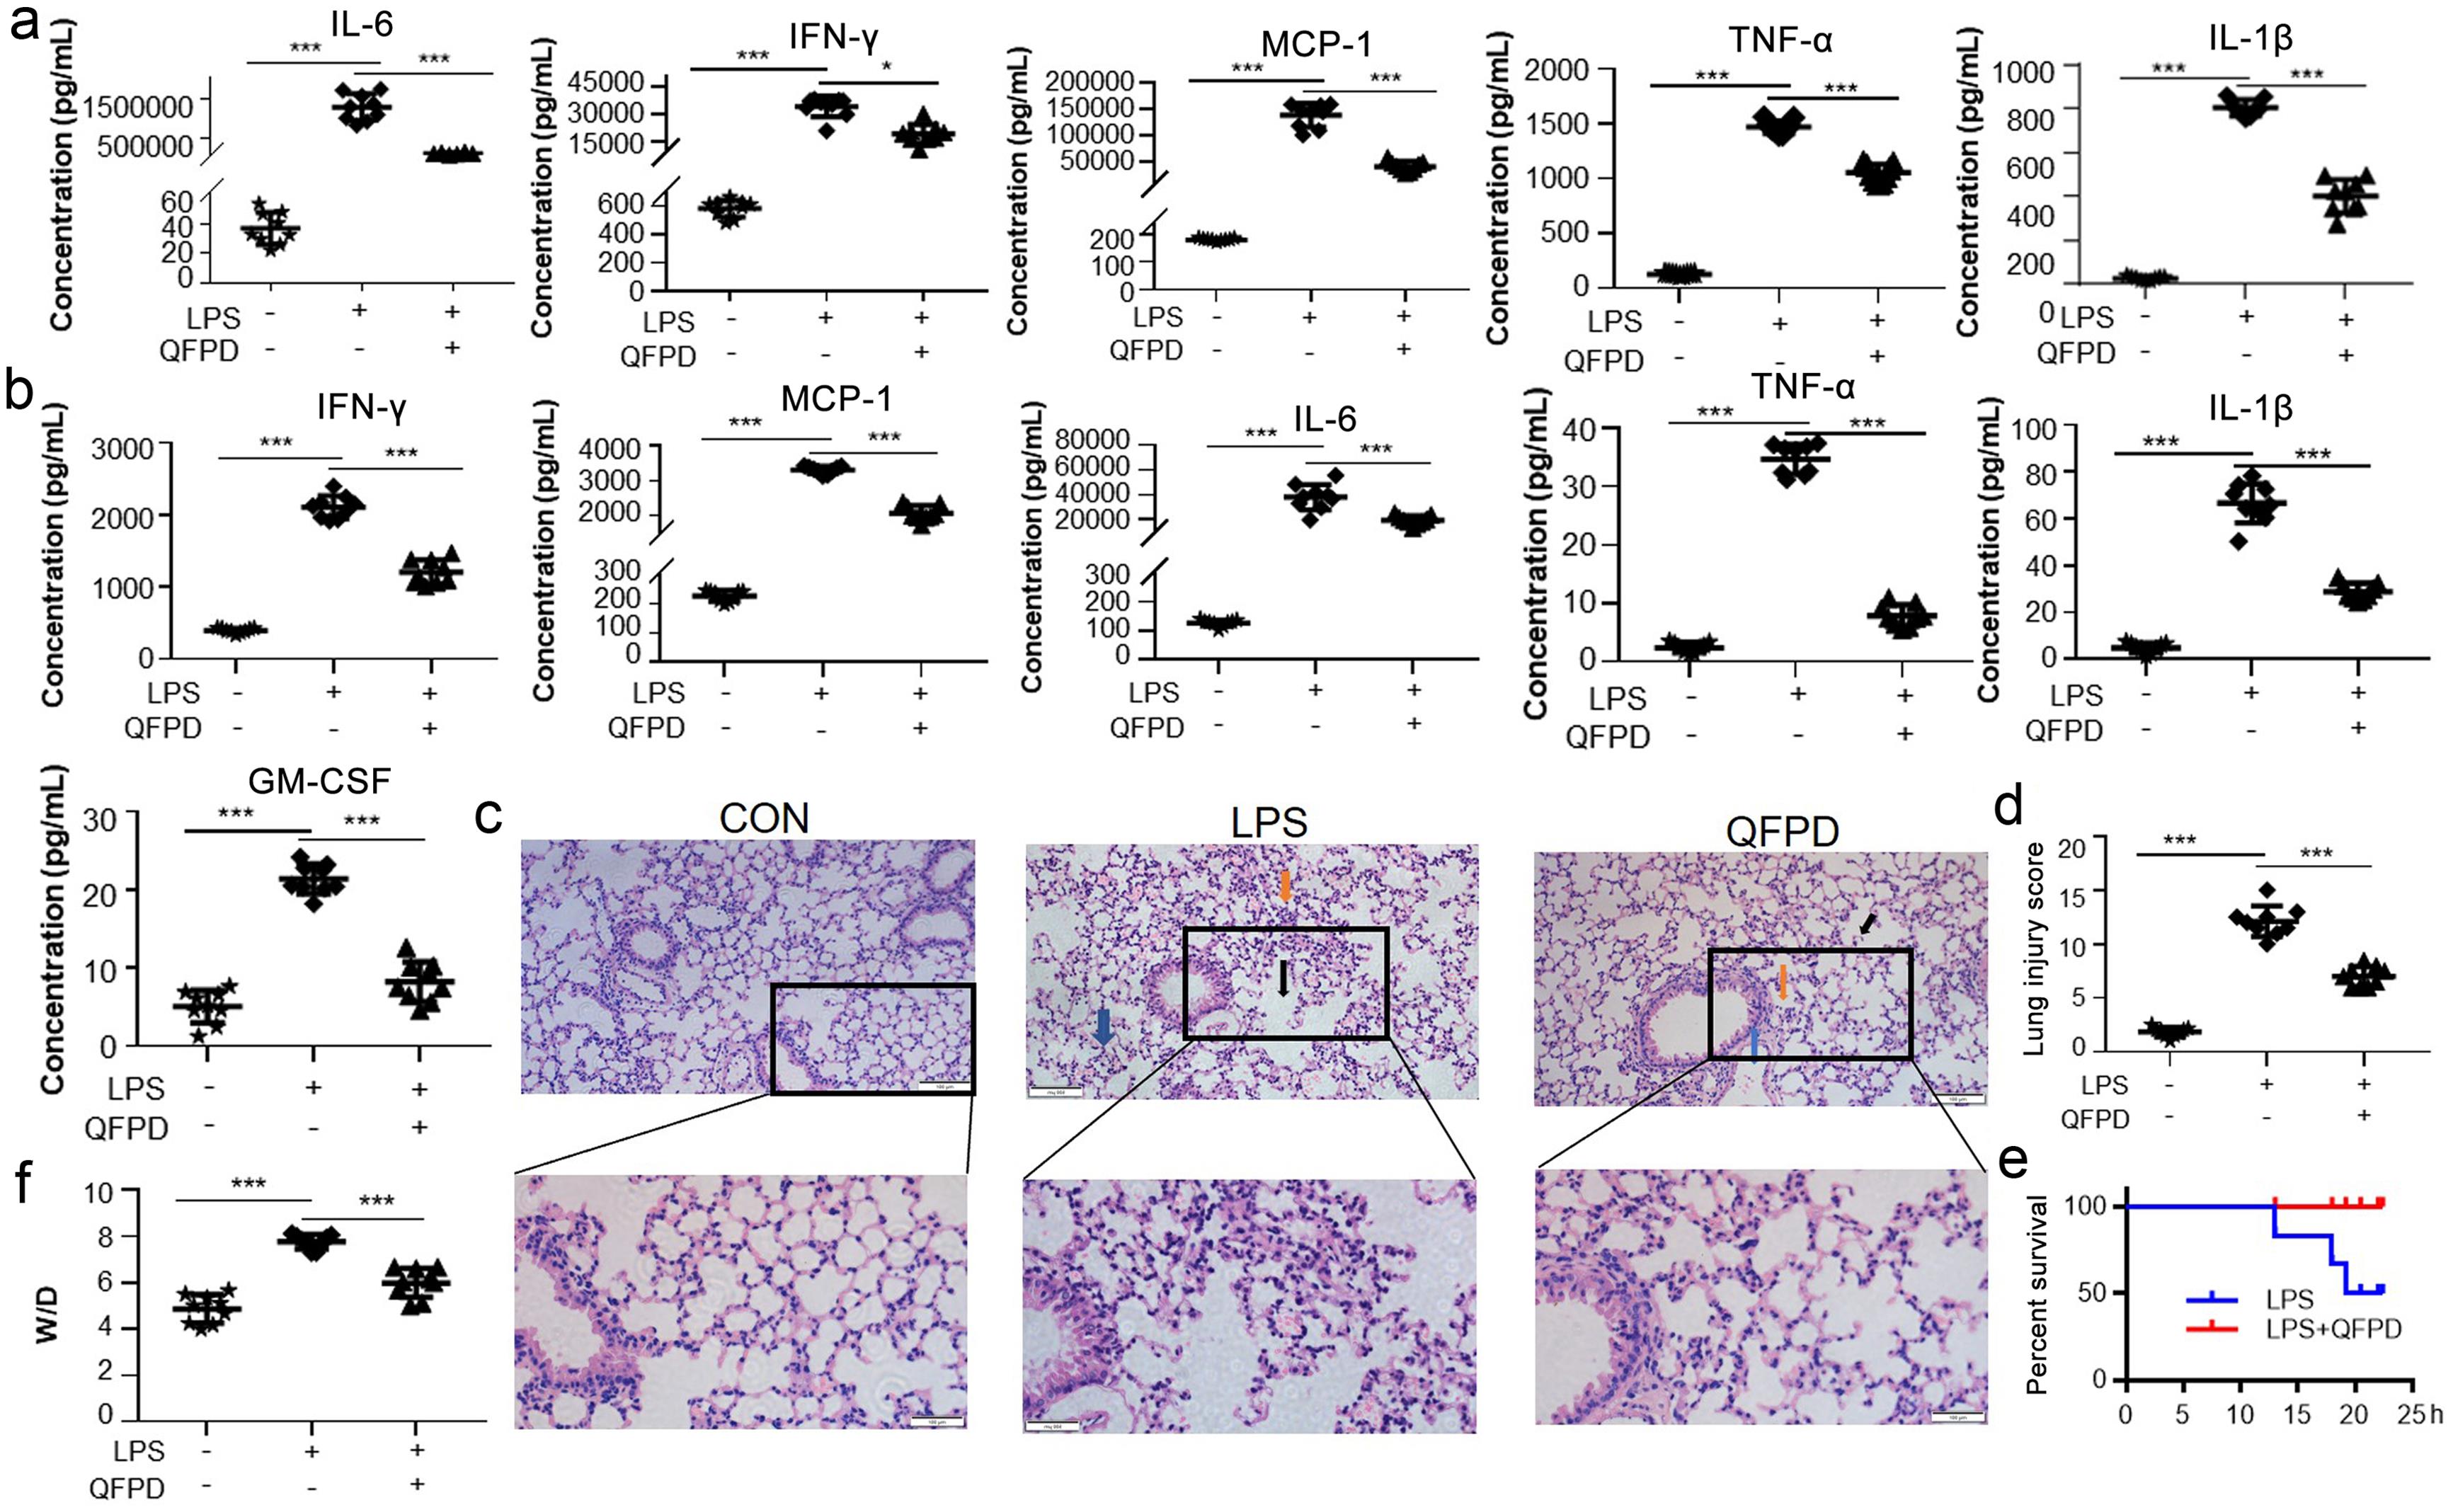 QFPD exerts protective effects against LPS-induced ALI <italic>in vivo</italic>.